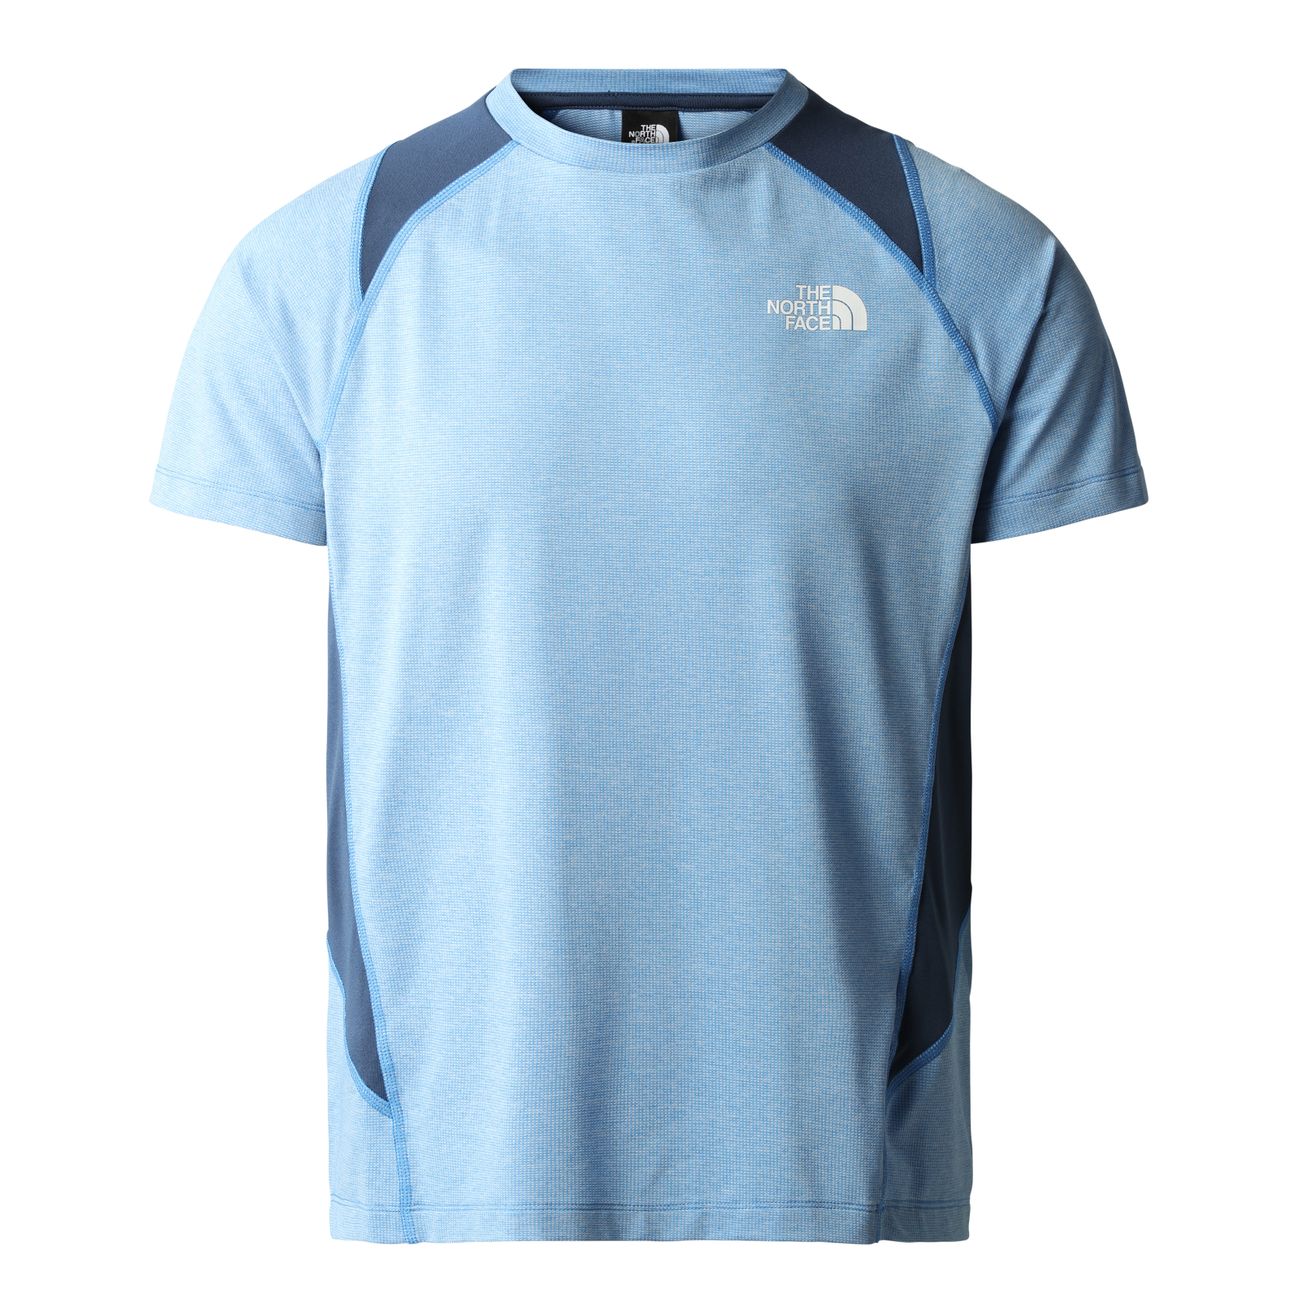 THE NORTH FACE M AO GLACIER TEE Herren T-Shirt - The North Face - SAGATOO - 196012626809